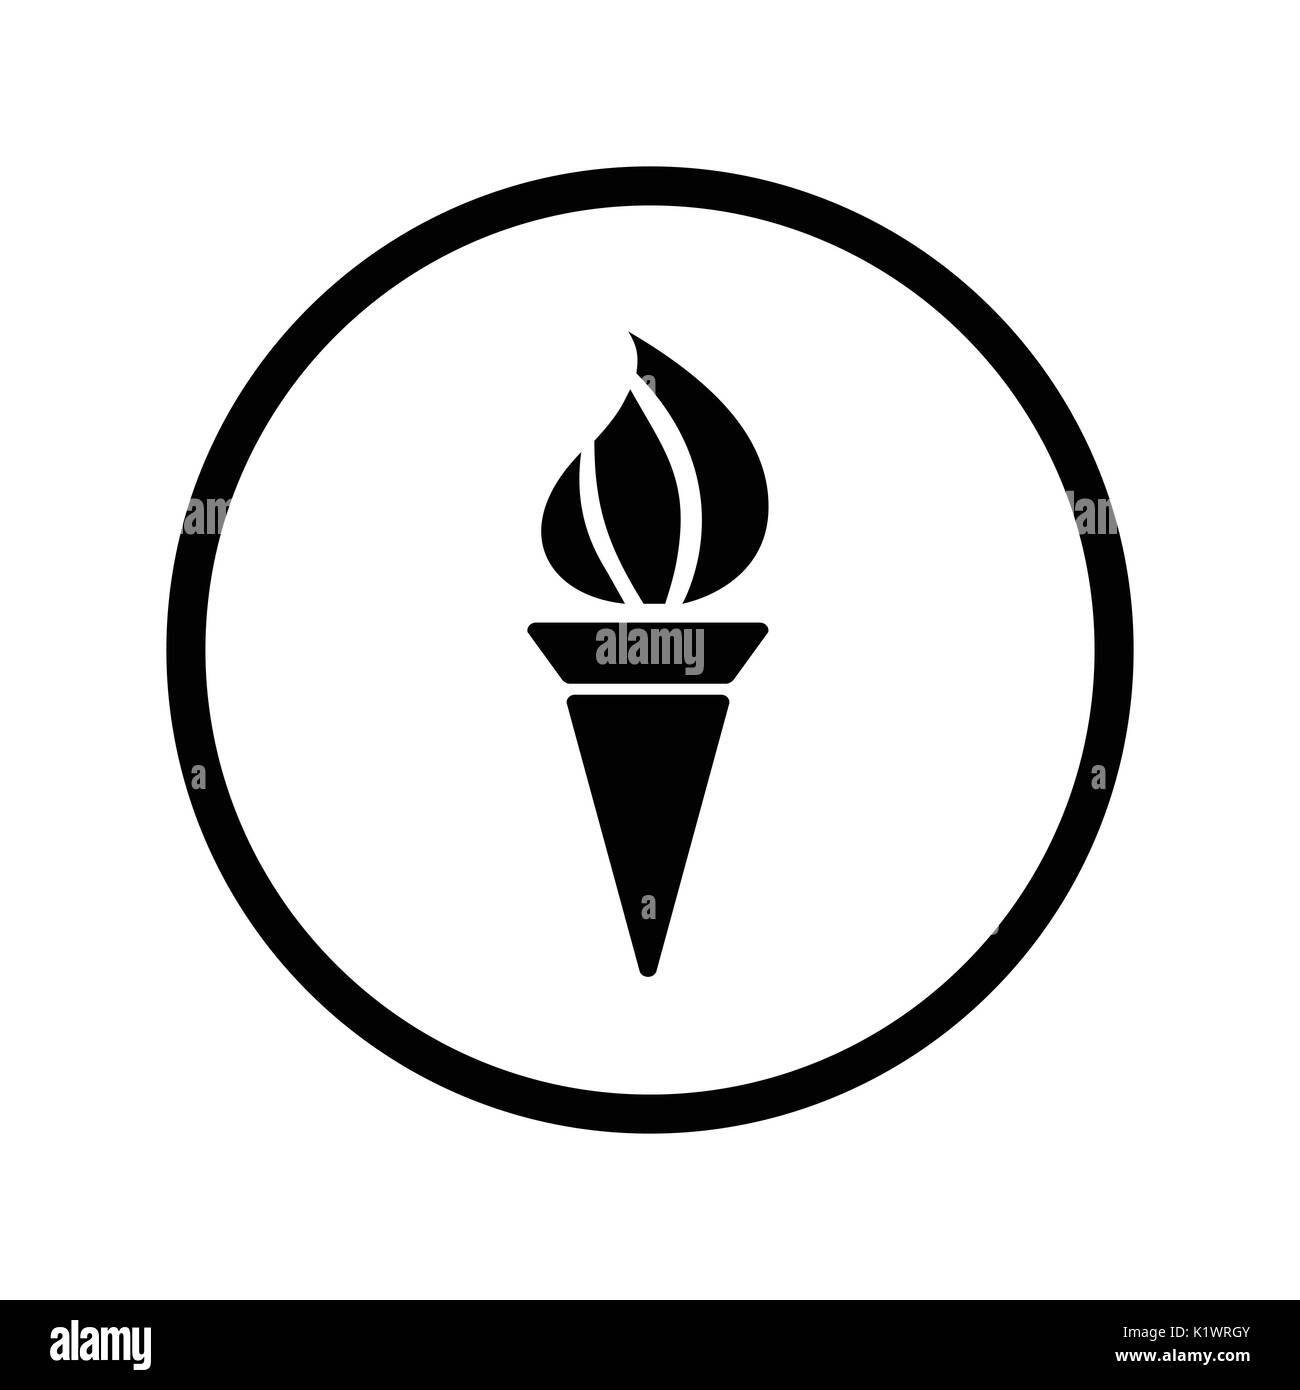 Torch icon, iconic symbol inside a circle, on white background.  Vector Iconic Design. Stock Vector